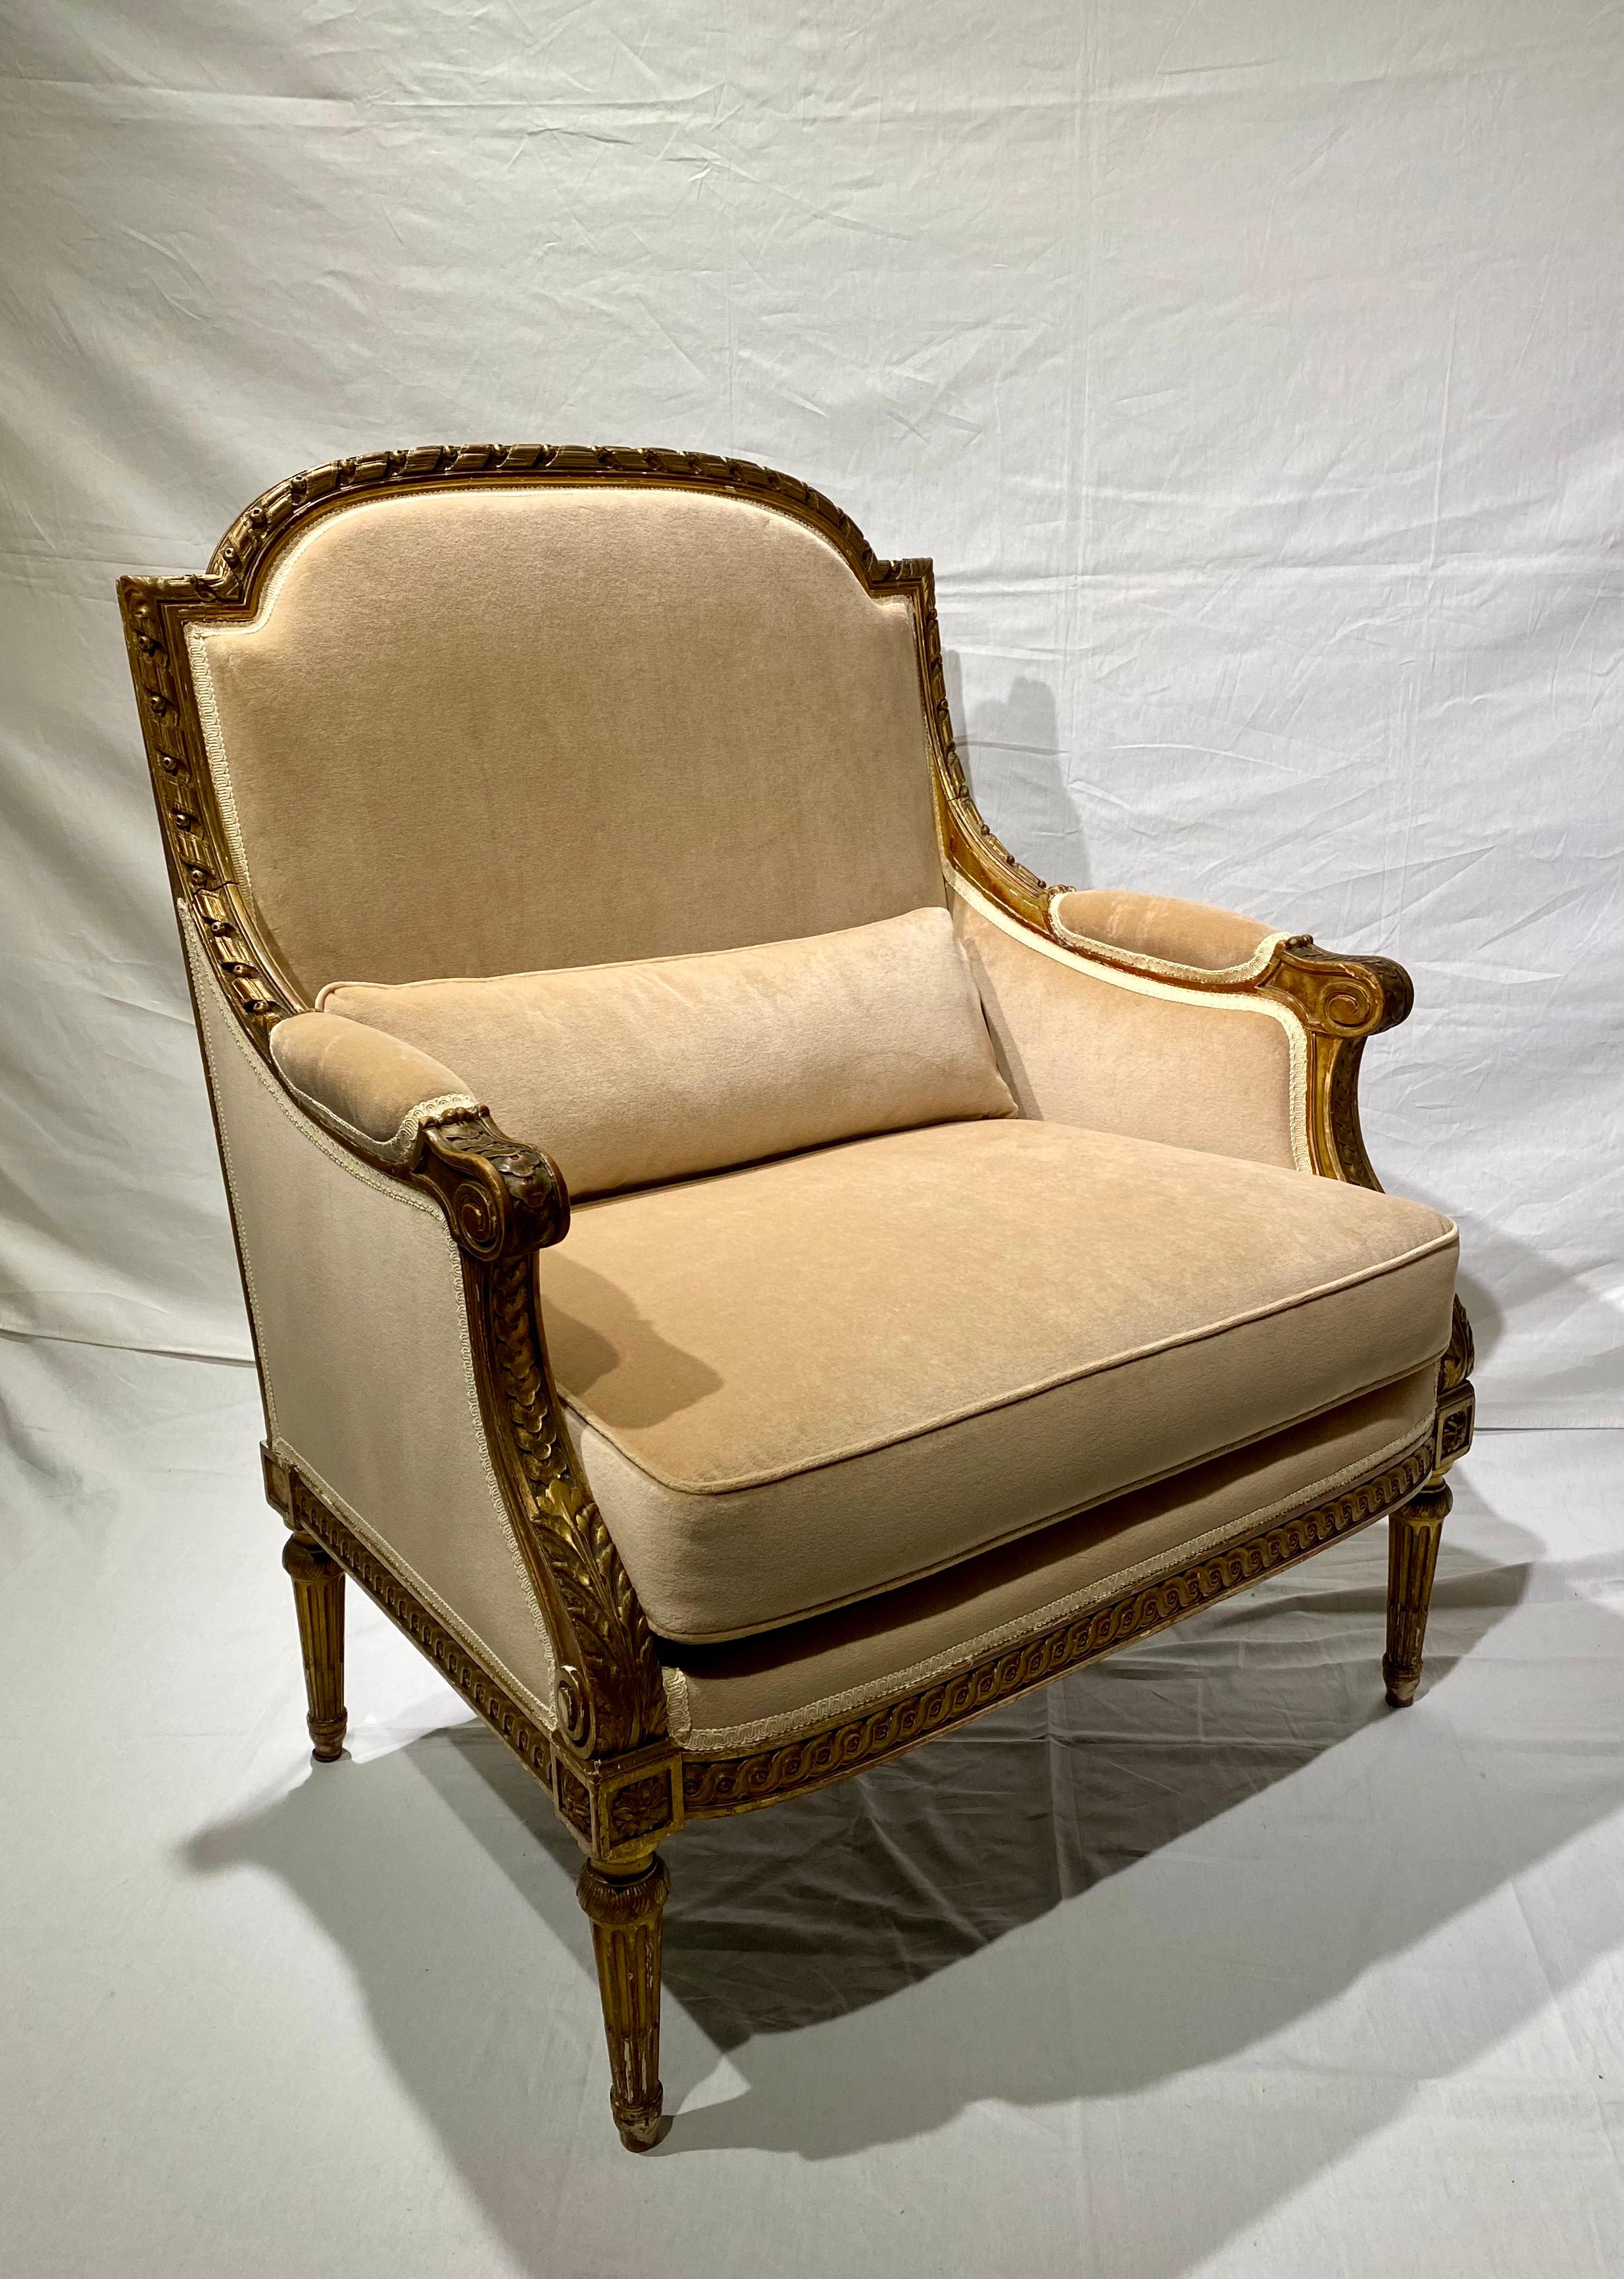 chaise marquise